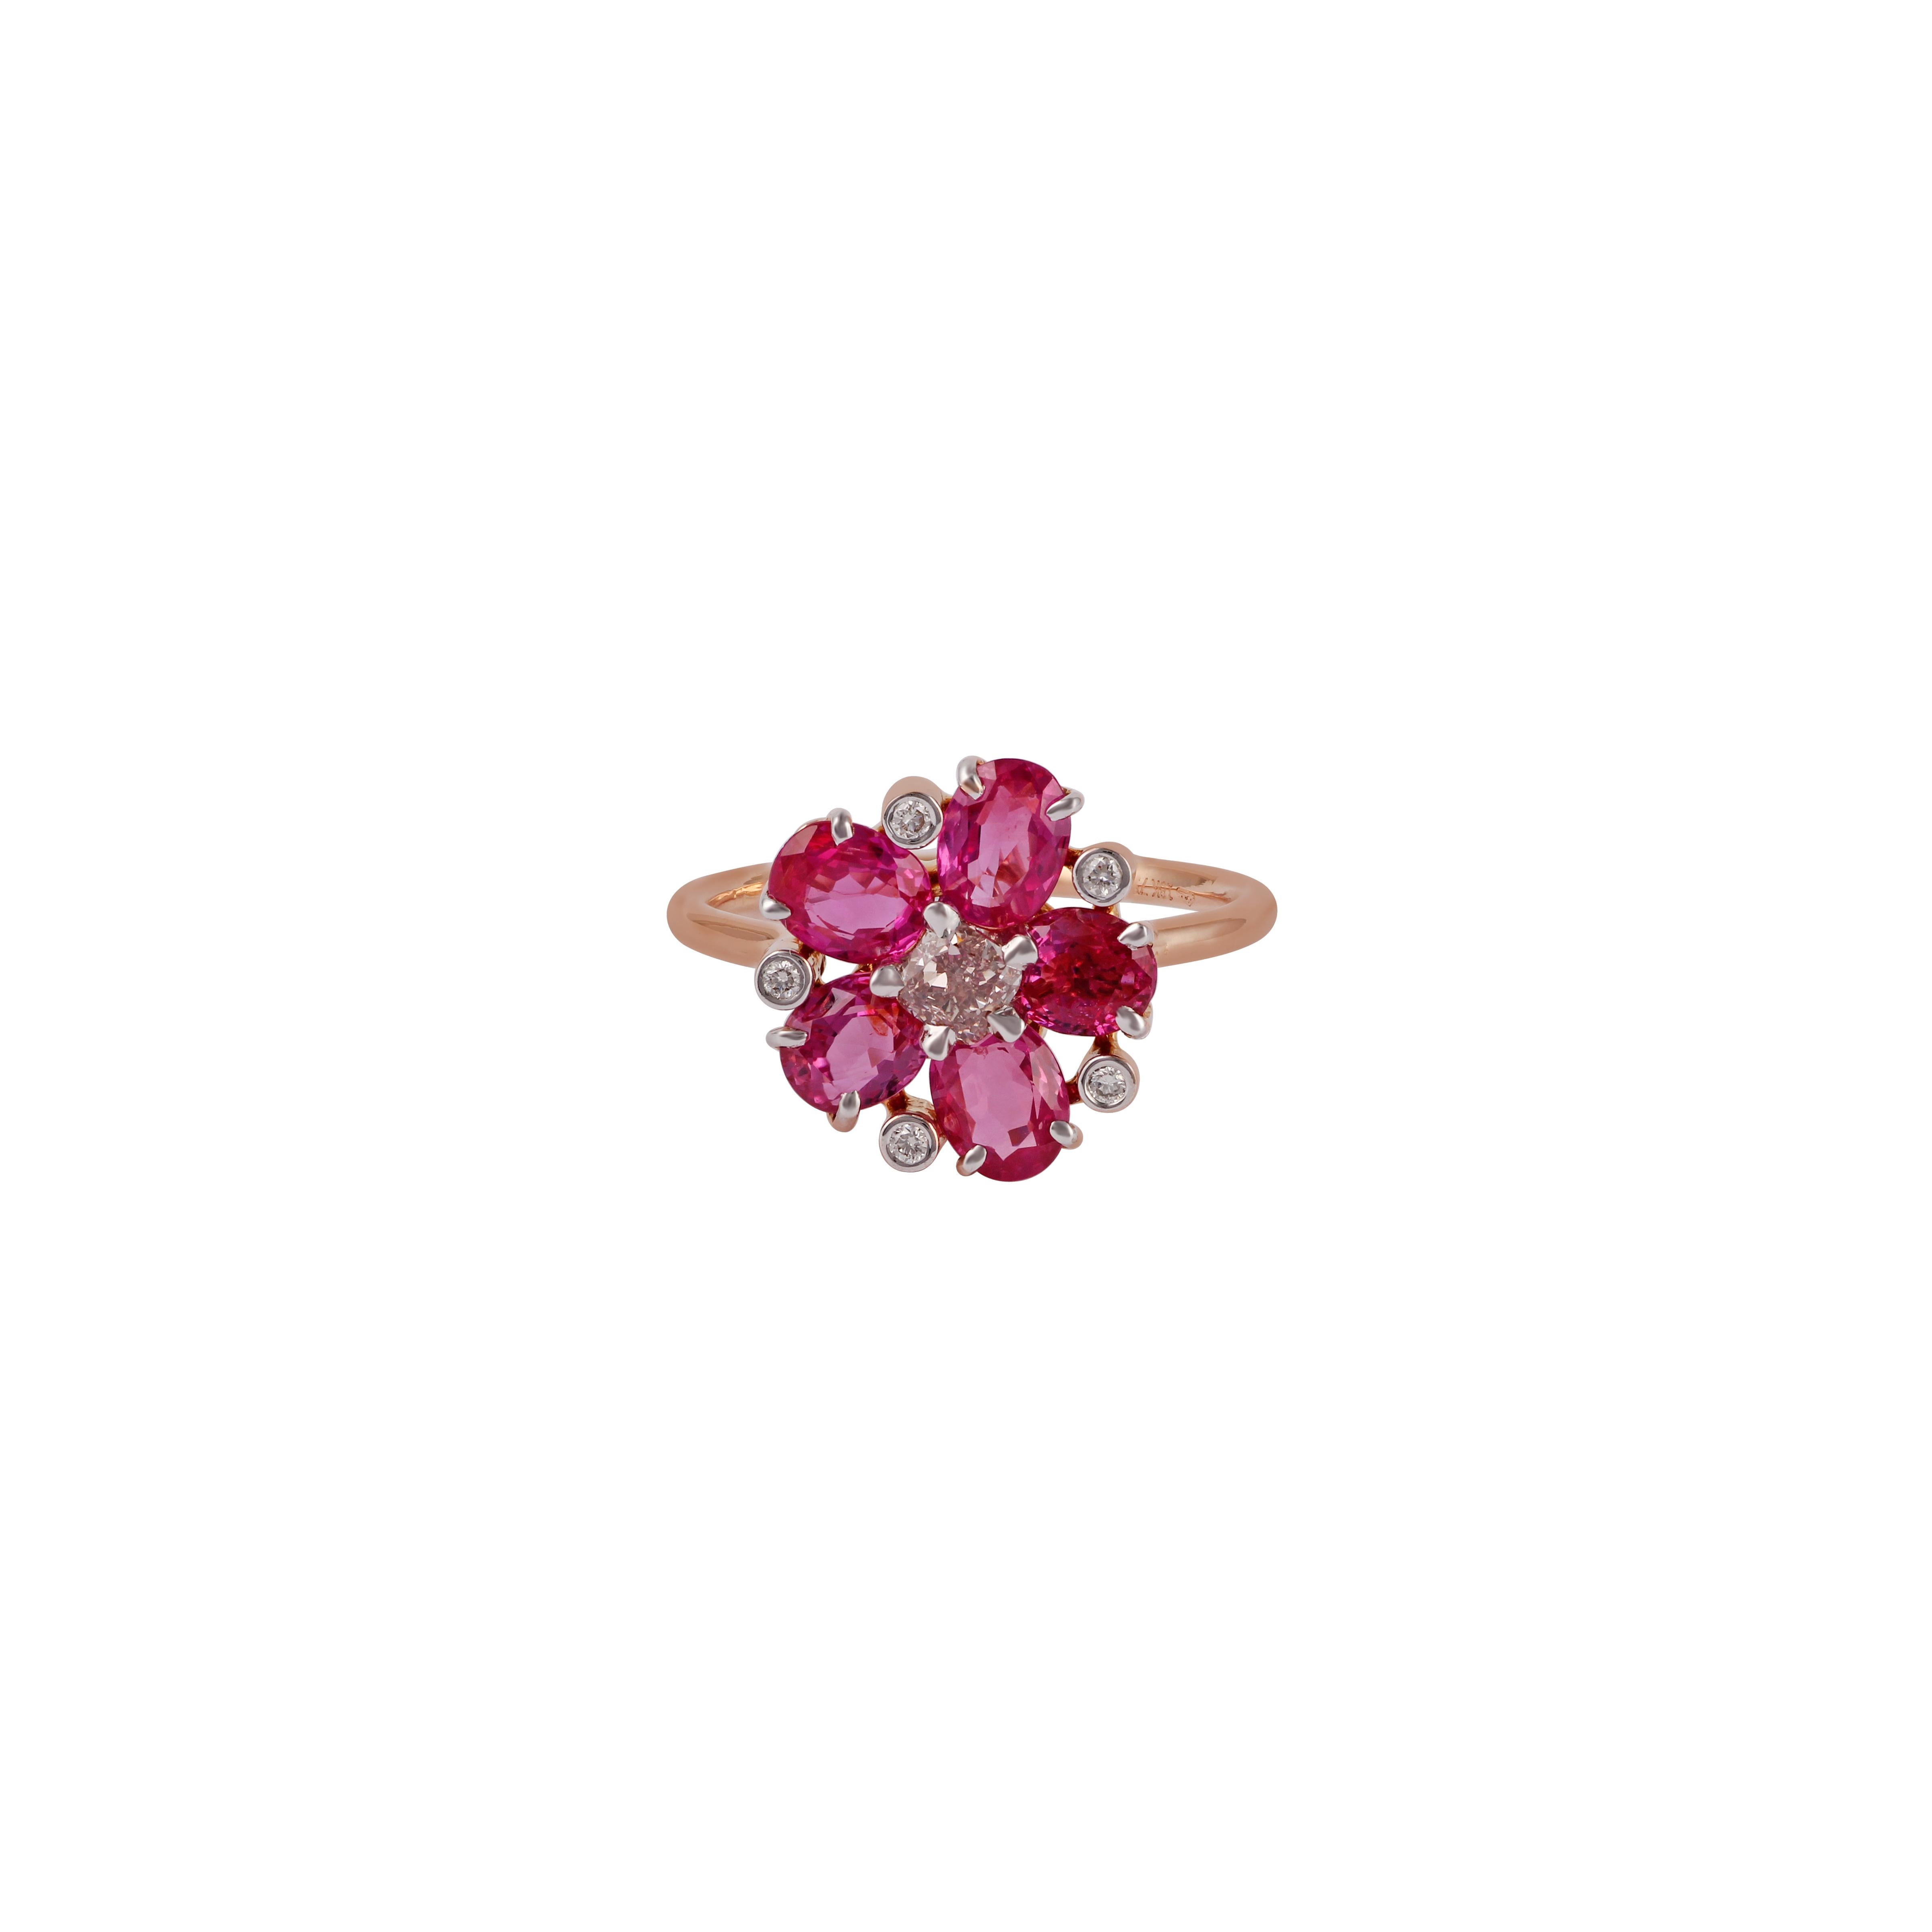 This is an exclusive ring studded in 18k rose gold with 5 pieces of oval shaped ruby weight 2.97 carat with 1 piece of pink diamond in the center weight 0.29 carat & 5 pieces of round shaped diamond weight 0.04 carat, this entire ring is studded in